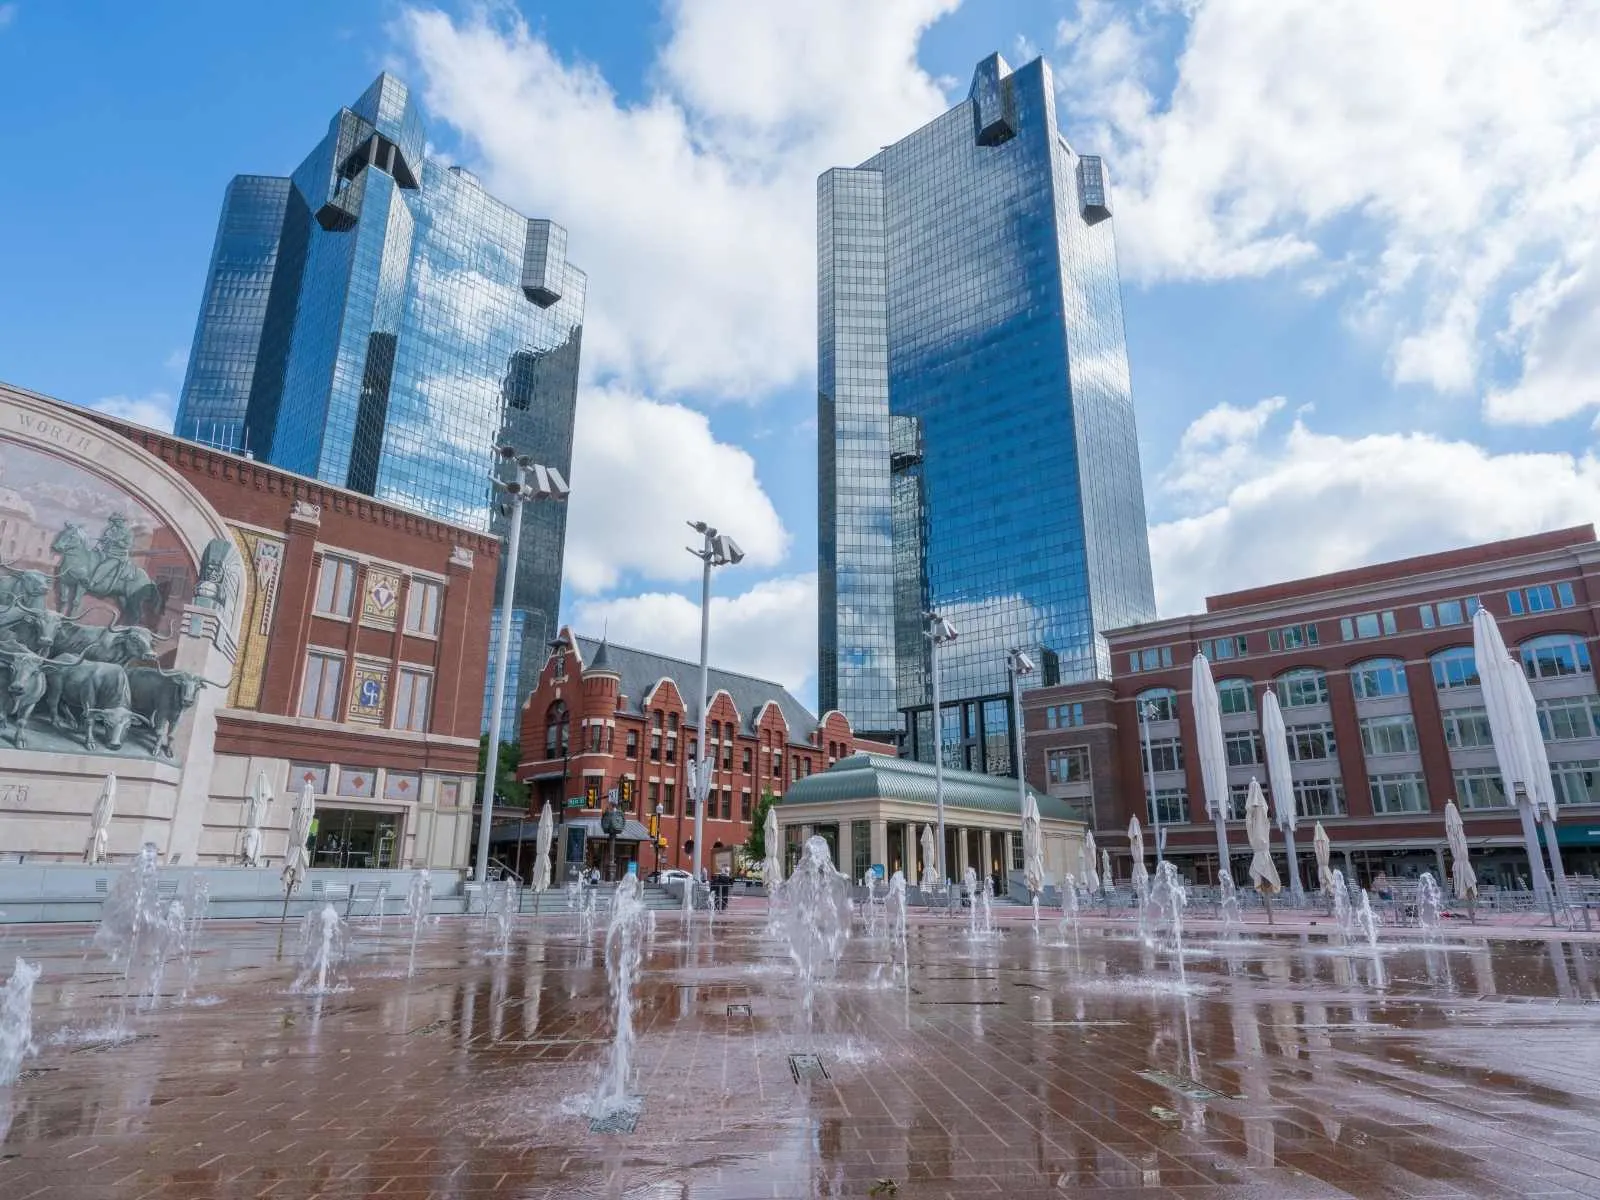 fountains and buildings in Sundance Square